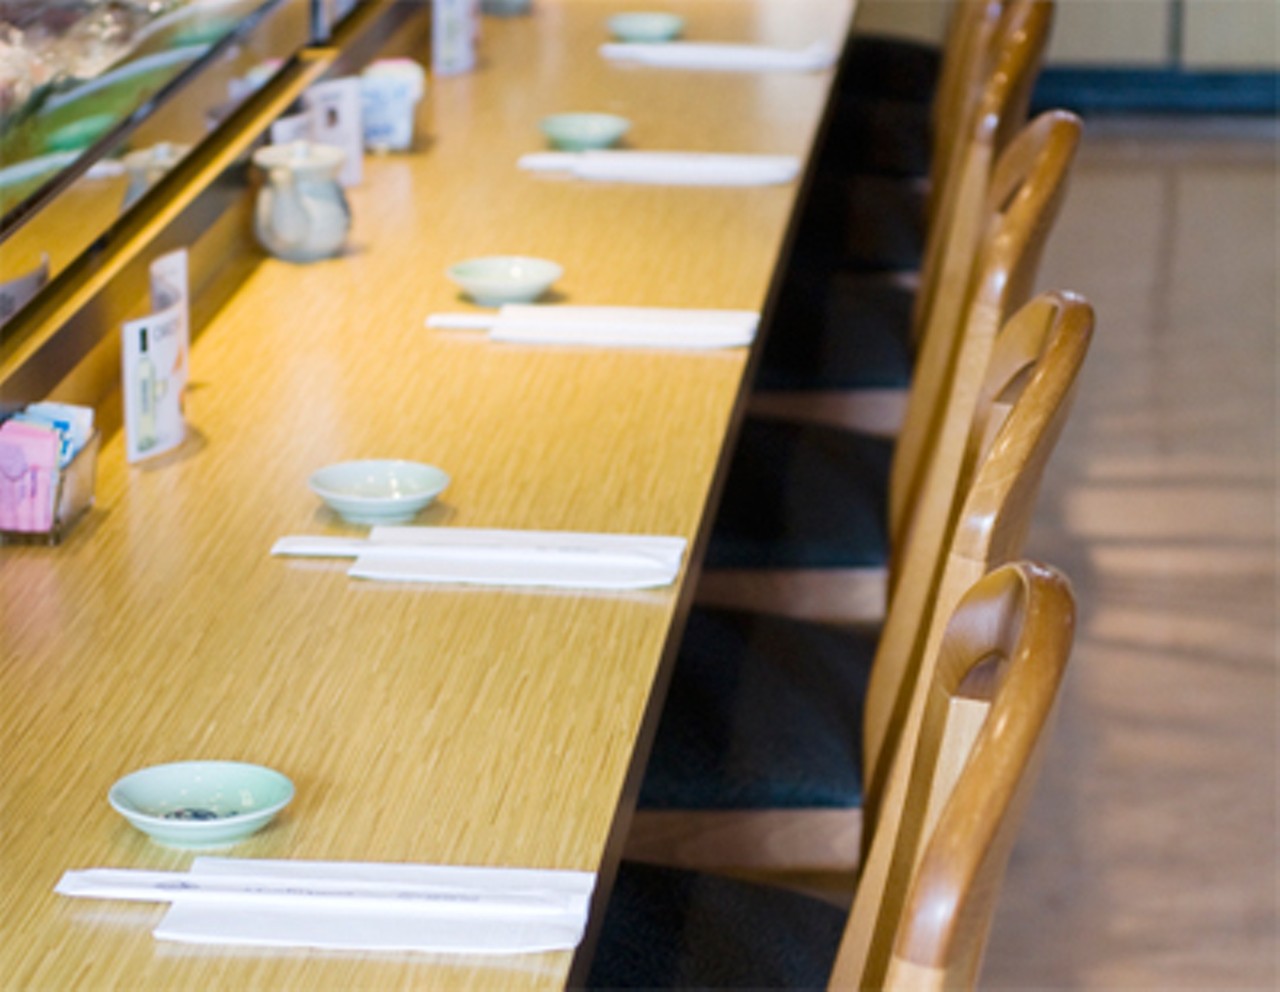 Read Ian Froeb's Review: "In Chesterfield, Momoyama's picks up where Yoshi's Sushi left off."